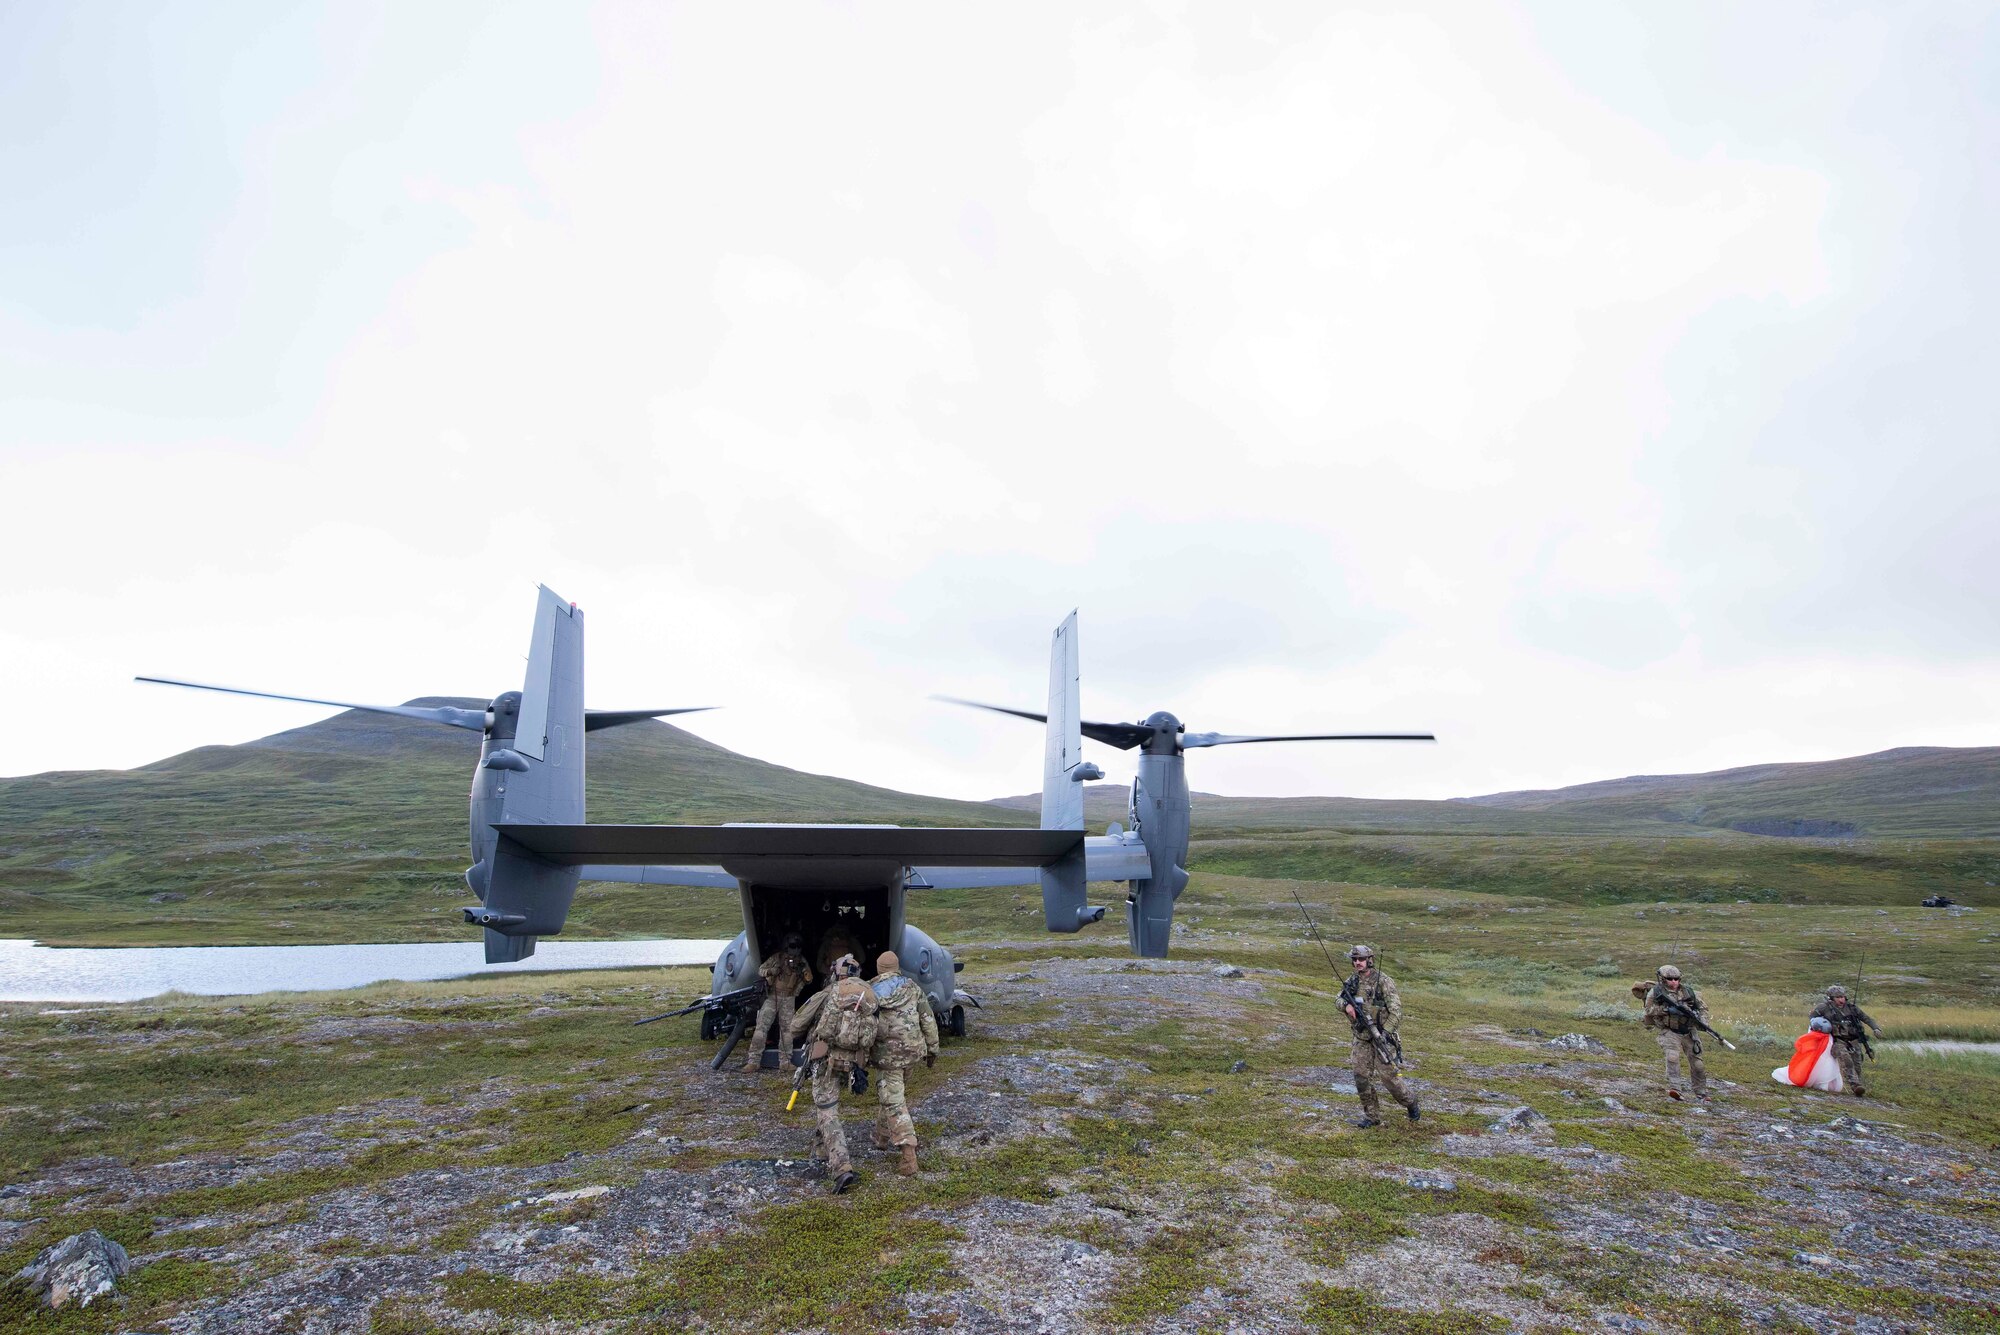 321st Special Tactics Squadron Airmen return a simulated downed crew member back to a CV-22B Osprey, based out of RAF Mildenhall, U.K., during a training exercise near Bodø, Norway, August 27, 2020. Integration with the Norwegian Air Force allowed the 352d Special Operations Wing to enhance and strengthen bonds with our partner nation and further secure the strategic high-north region. The exercise provided training for 352d Special Operations Wing members on capabilities such as personnel recovery, forward area refueling point, aerial refueling, maritime craft delivery system, and fast rope training. (U.S. Air Force photo by Staff Sgt. Michael Washburn)